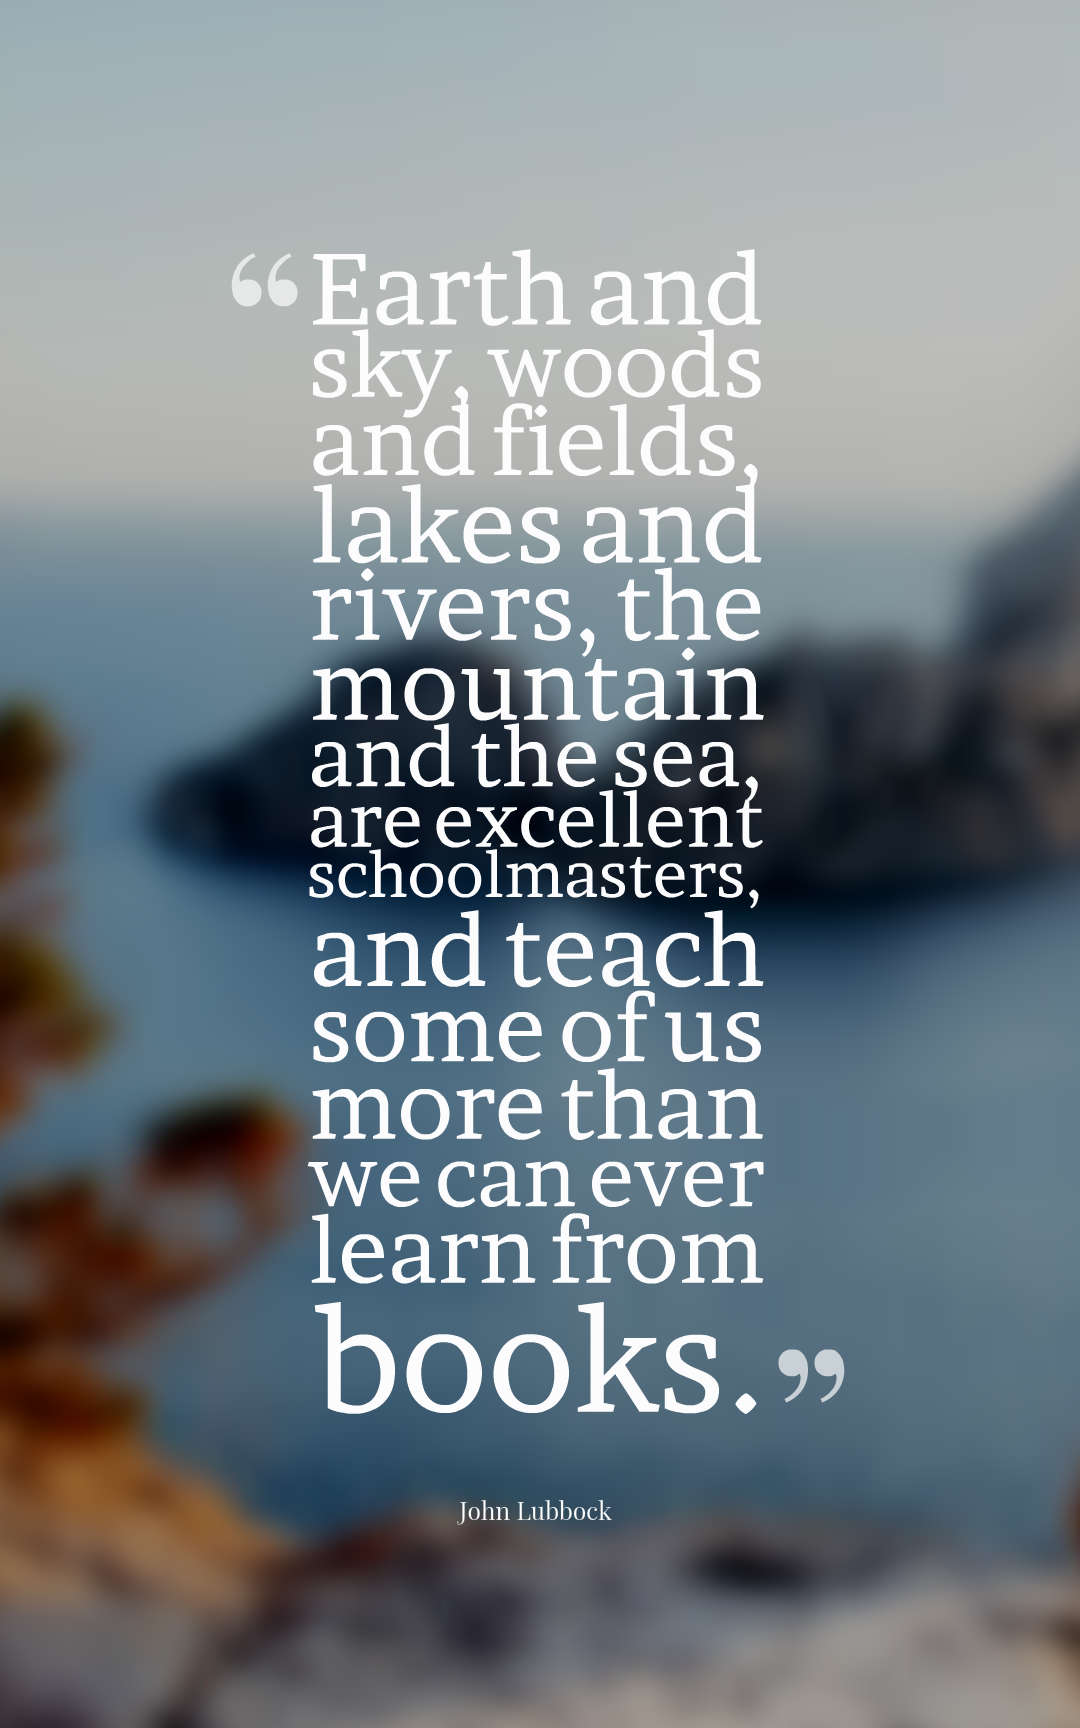 Earth and sky, woods and fields, lakes and rivers, the mountain and the sea, are excellent schoolmasters, and teach some of us more than we can ever learn from books.